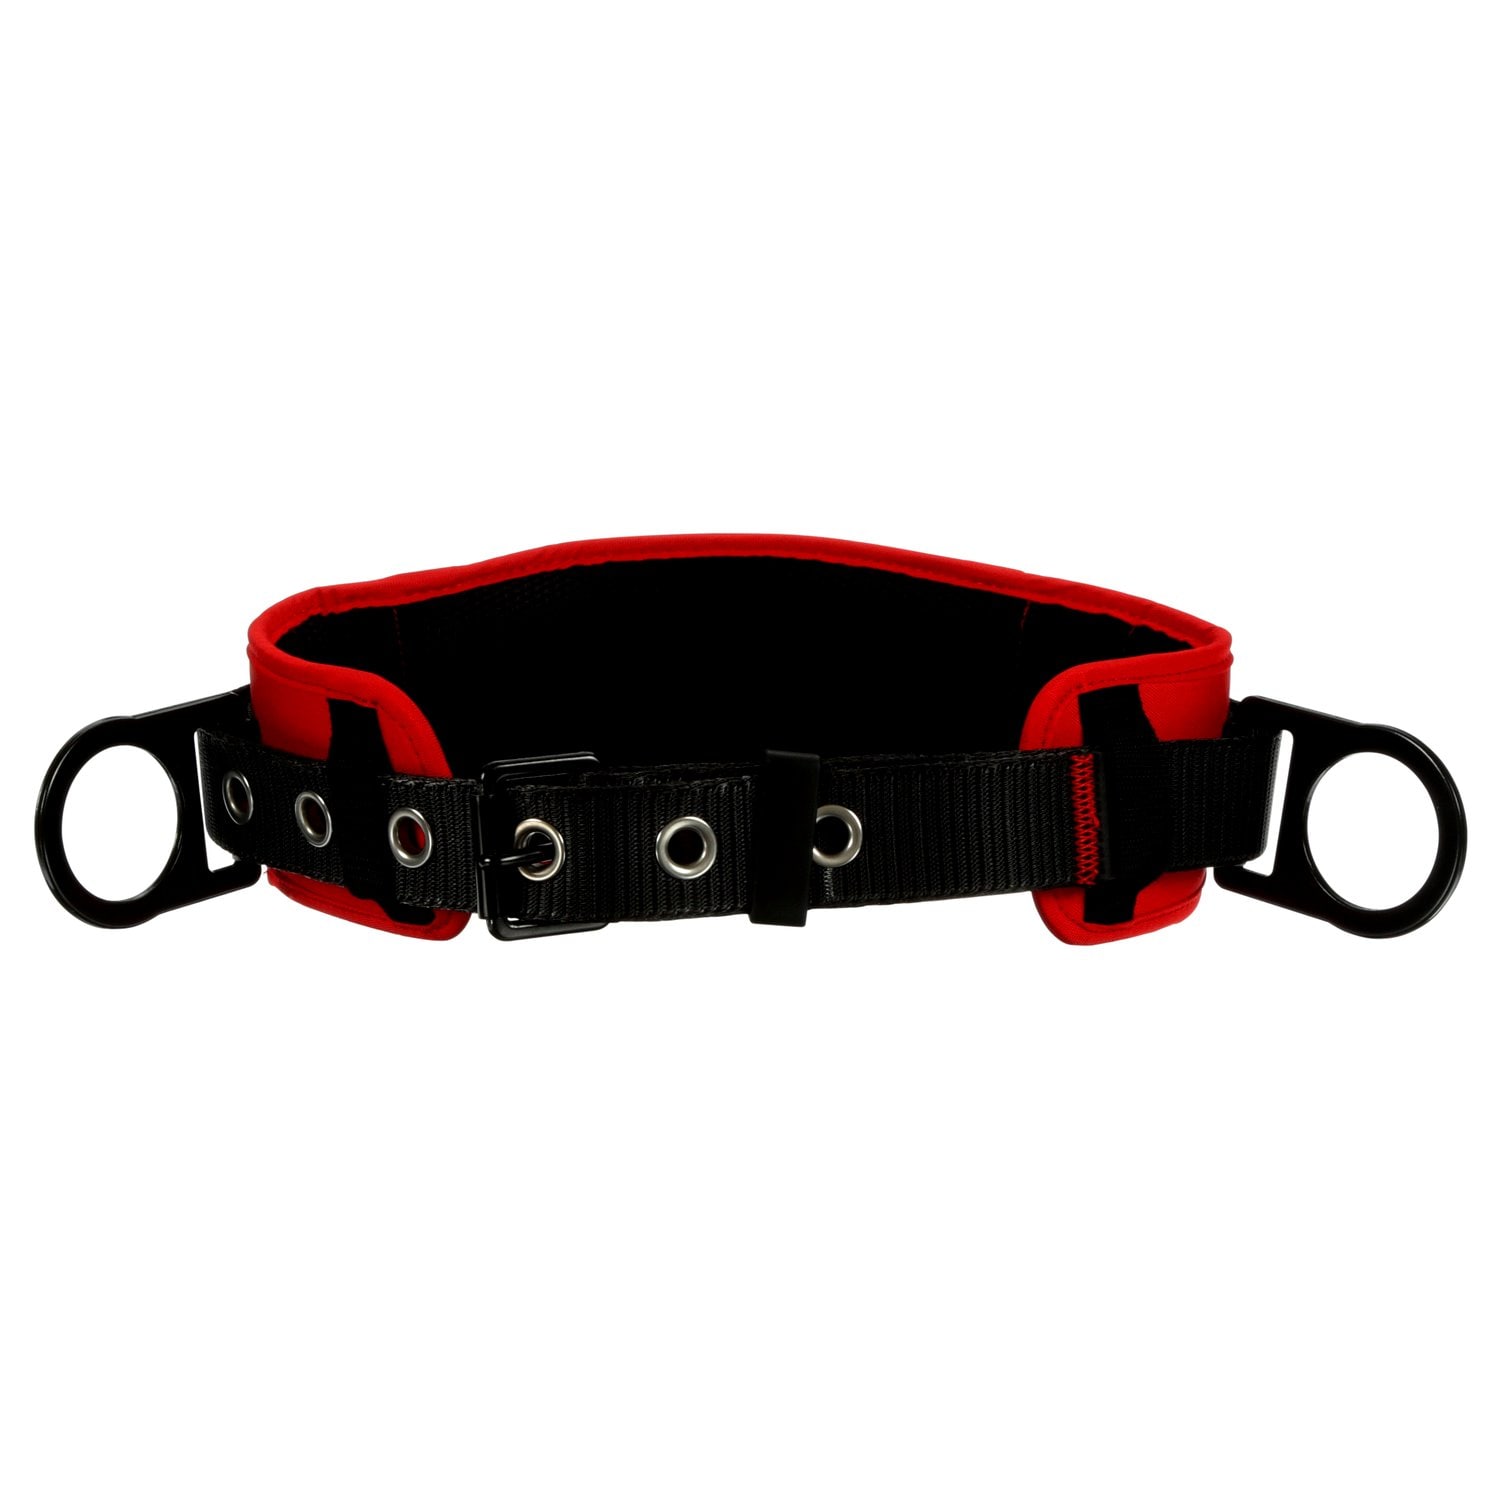 7012815161 - 3M Protecta Tongue Buckle Positioning Belt with Hip Pad 1091014, Red, Medium/Large